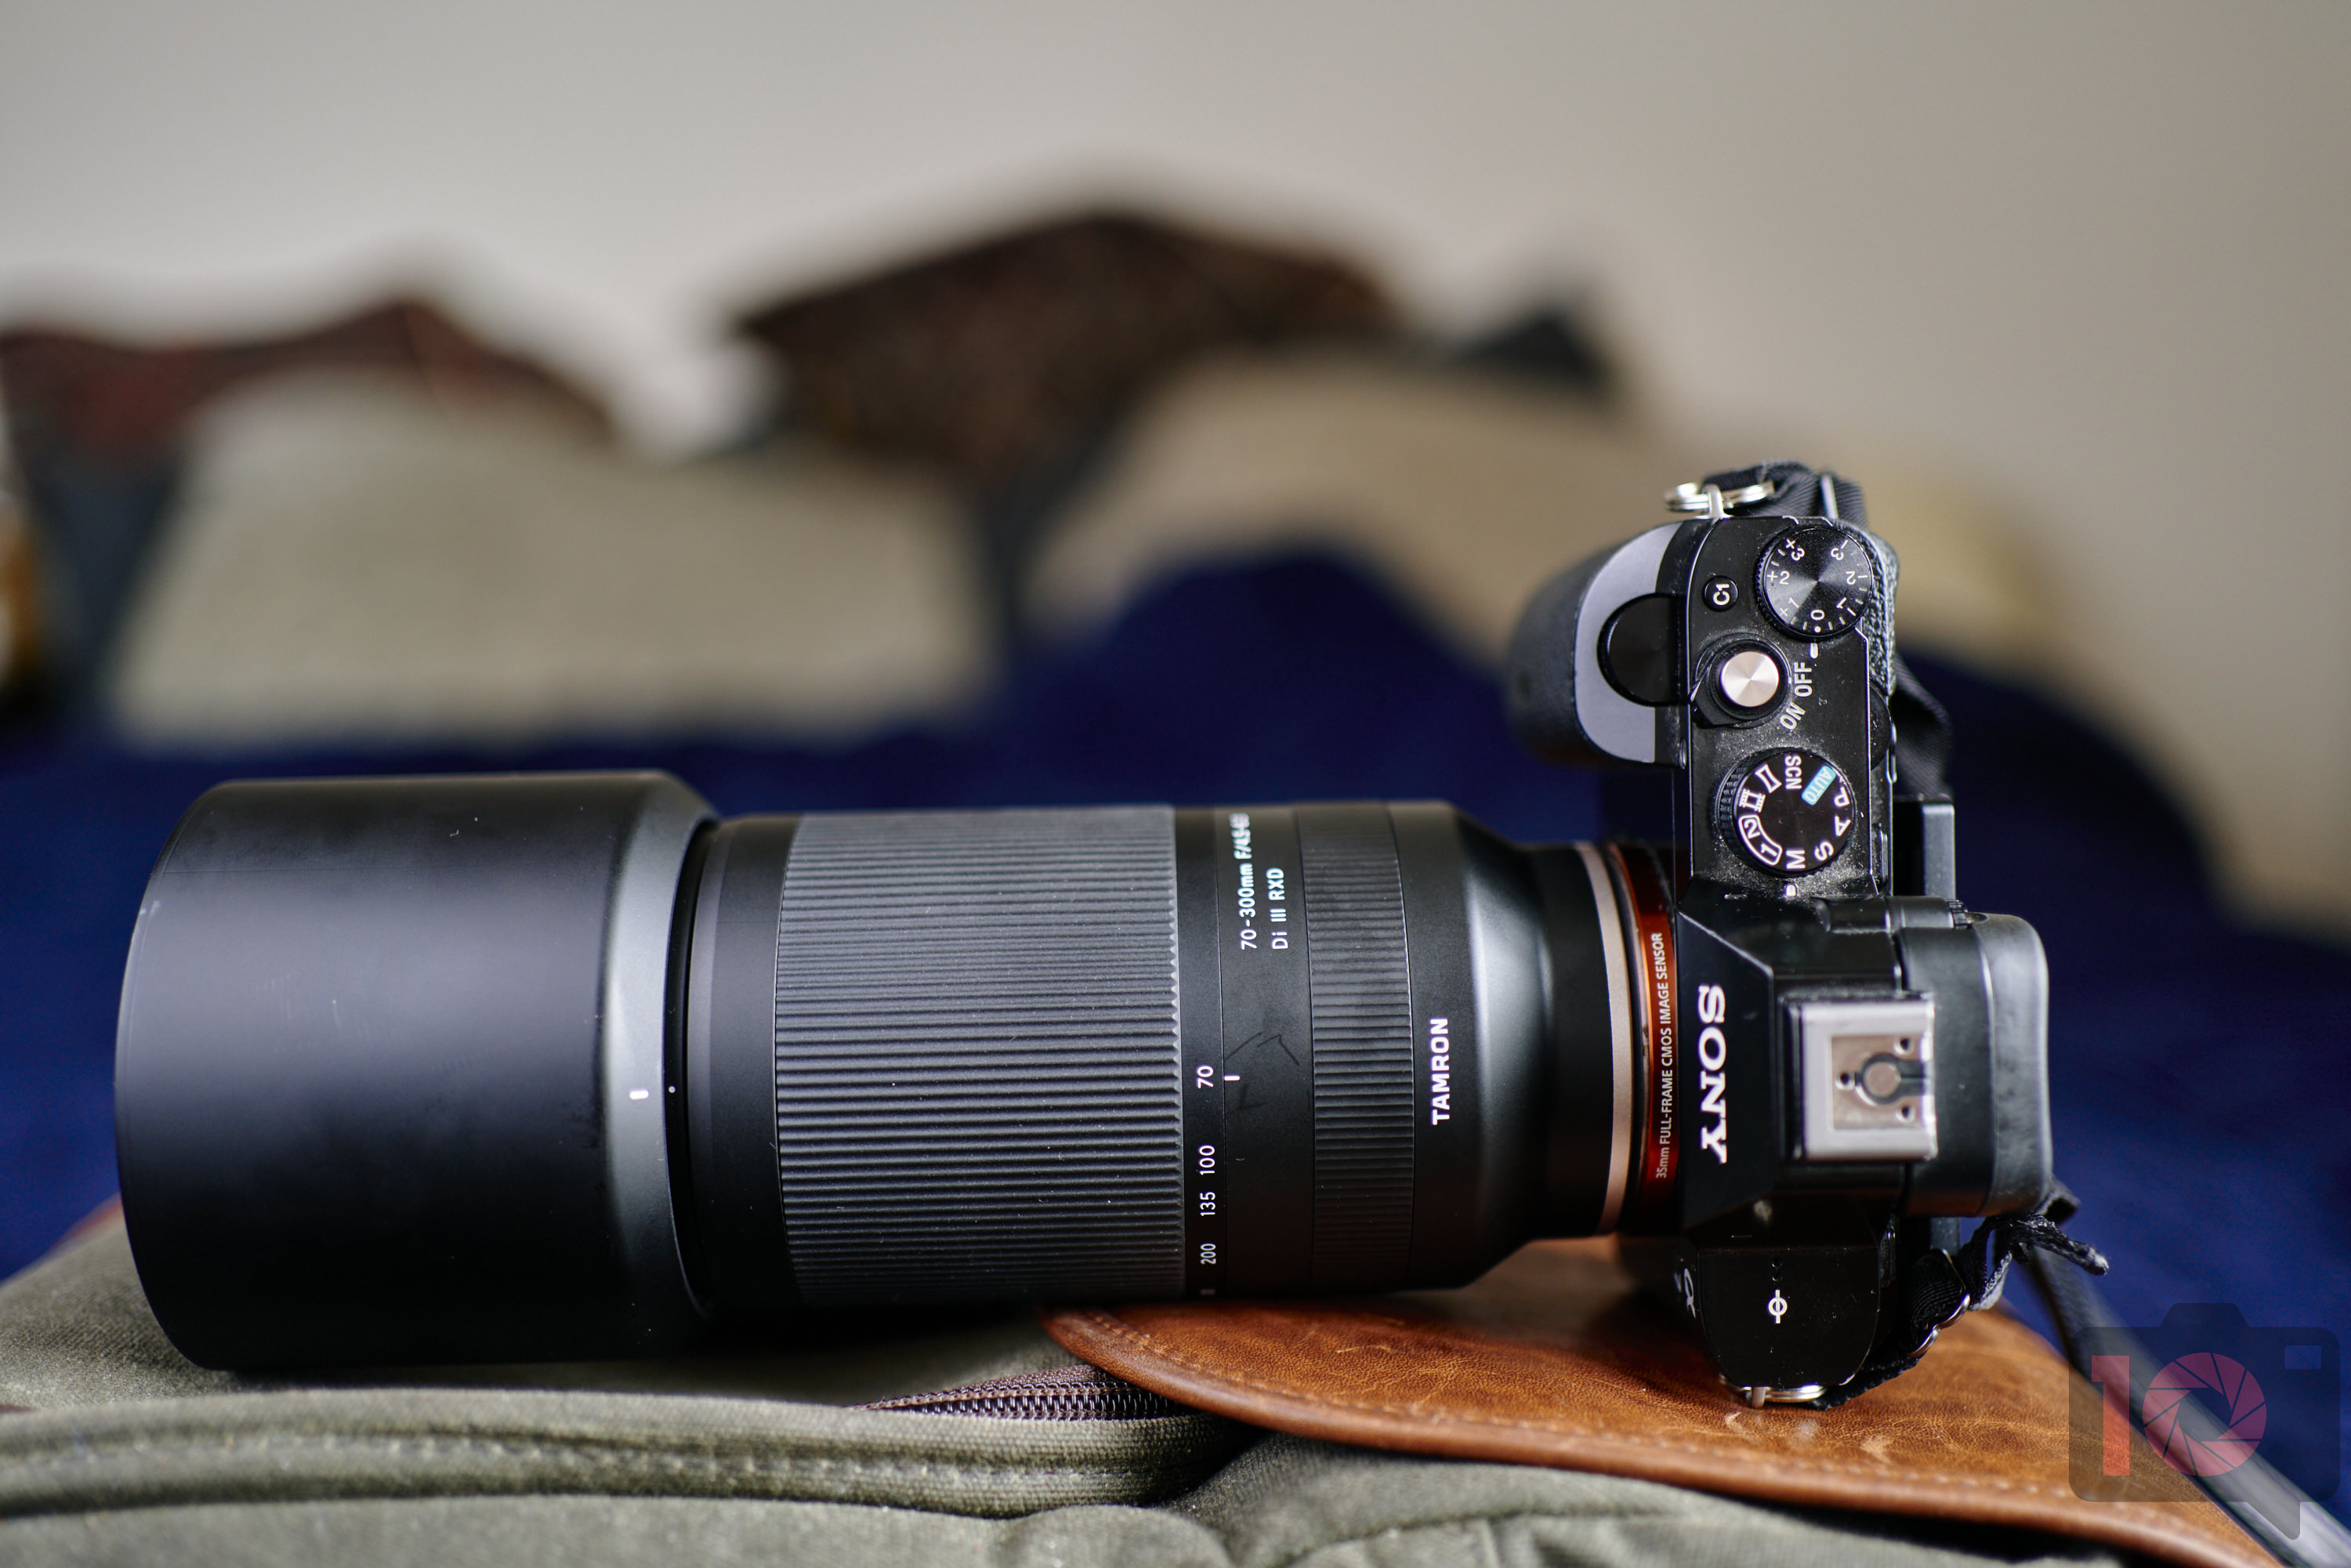 Chris Gampat The Phoblographer Tamron 70-300mm F4.5-6.3 Di III RXD review product images 1.81-60s400